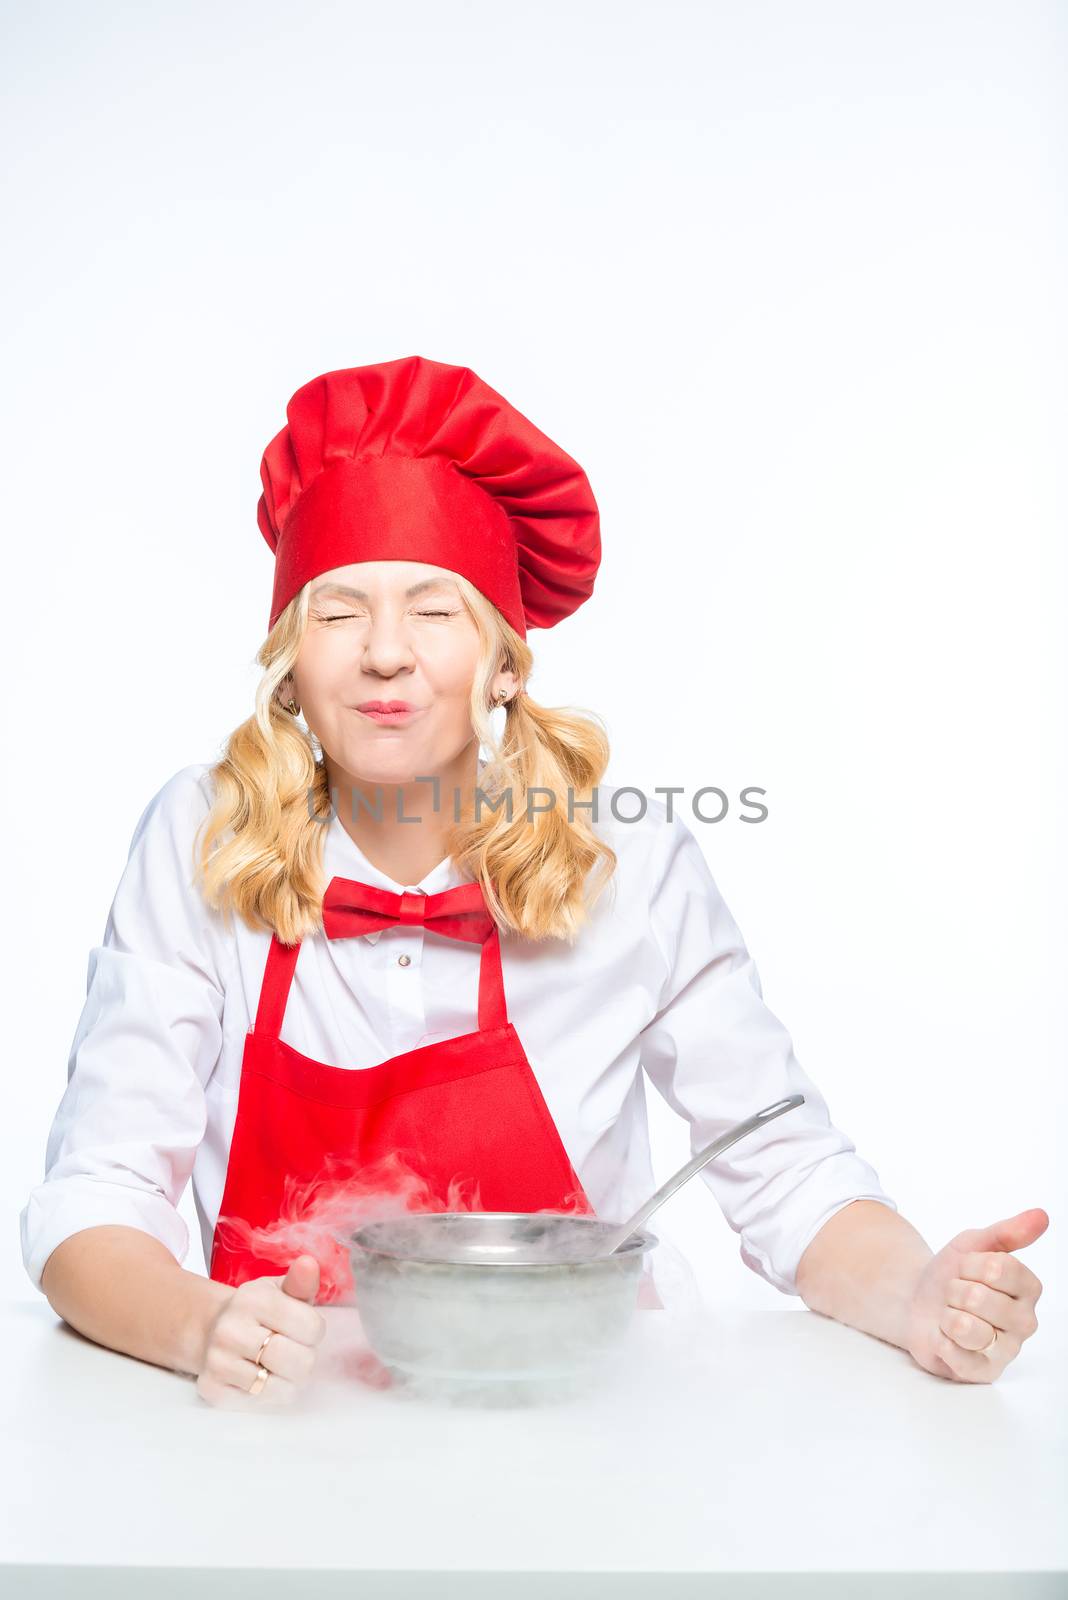 Cook in a red apron and hood conducts experiments with liquid ni by kosmsos111